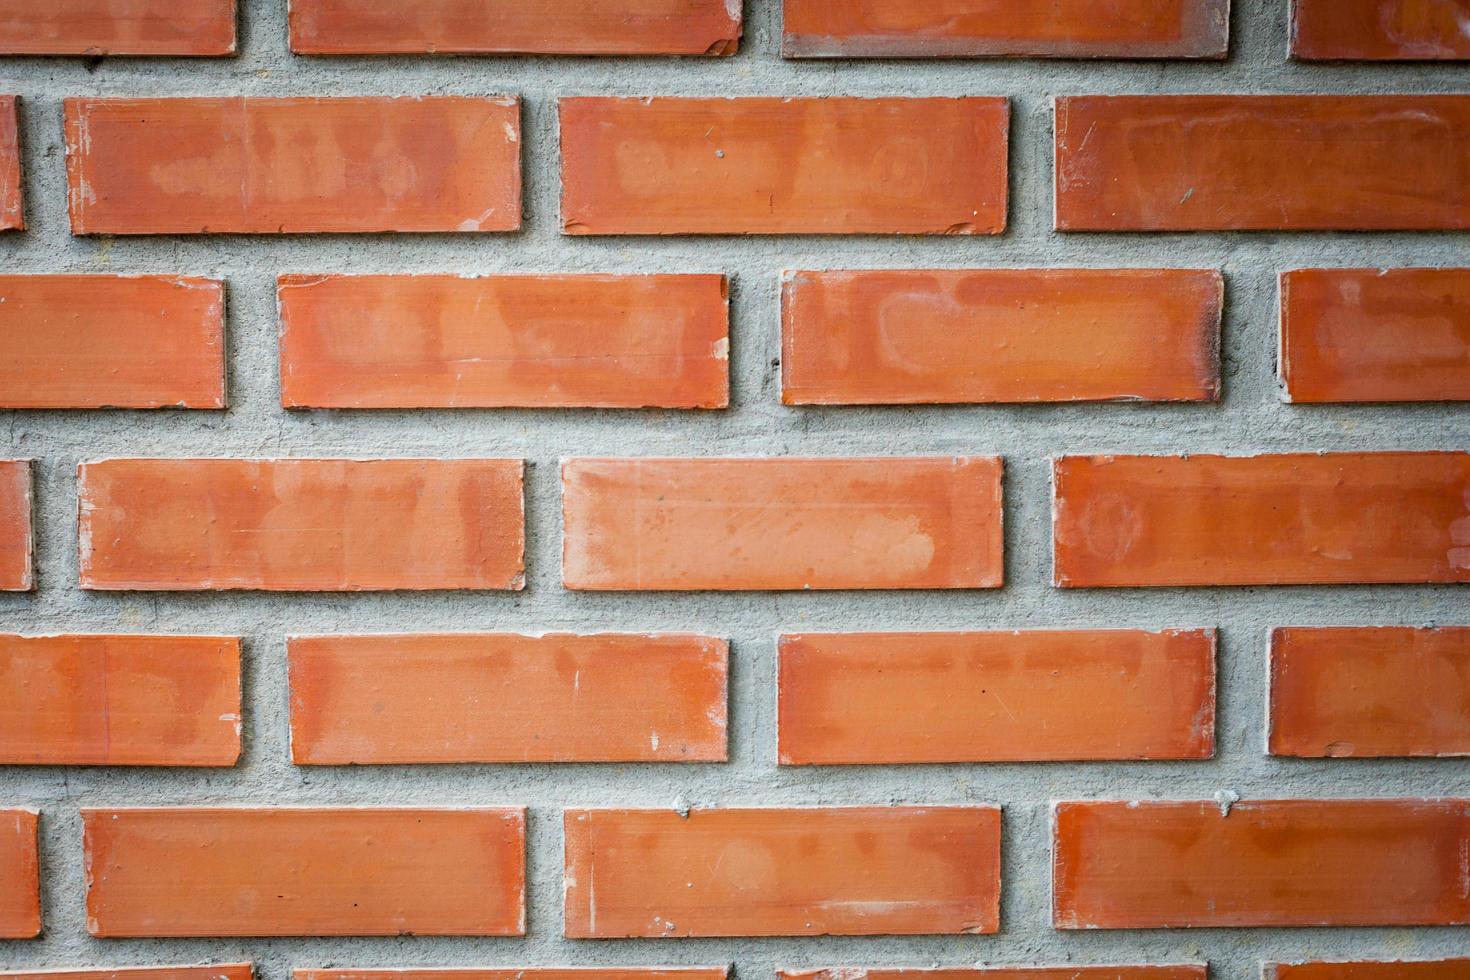 Red brick wall background photo